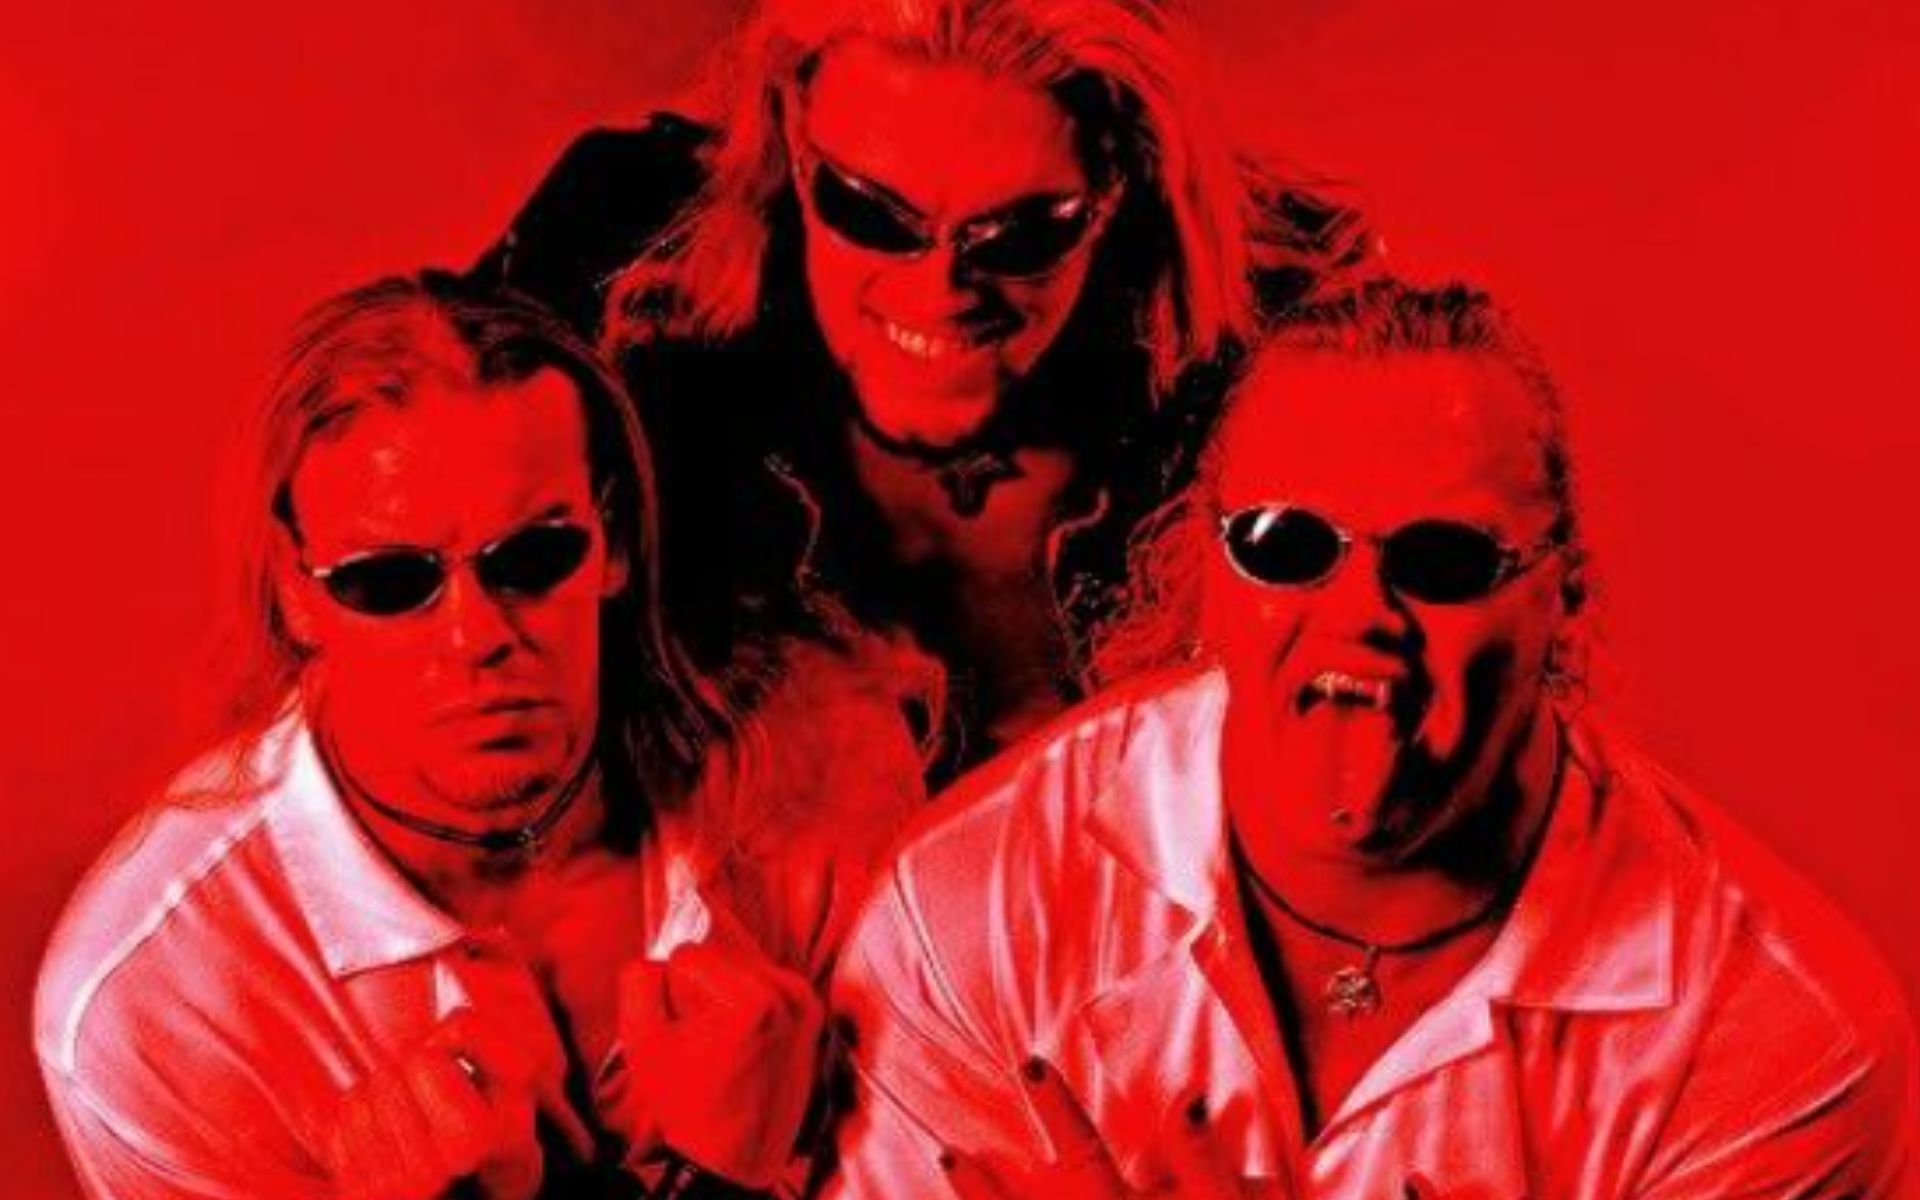 The Brood had a short but influential run in WWE